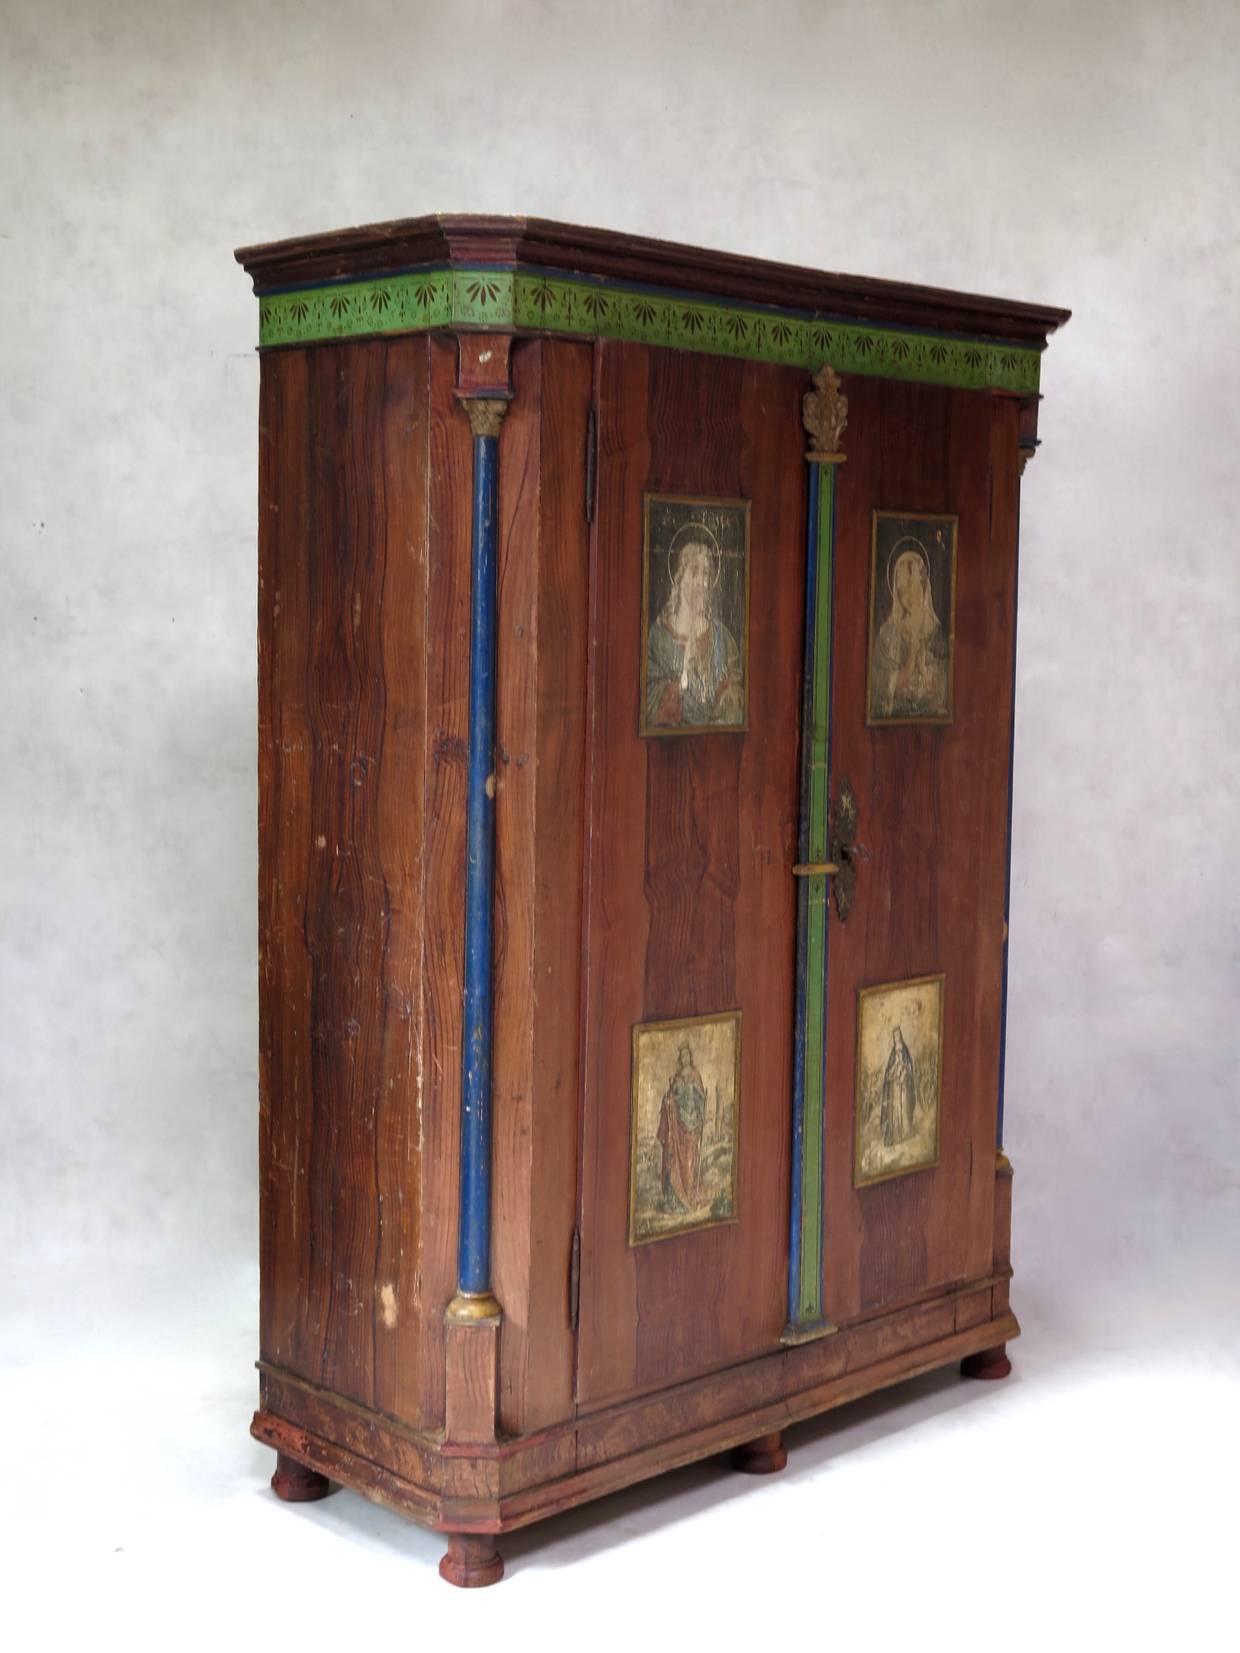 Lovely polychromed wardrobe decorated with a faux-bois trompe-l'oeil and with panels depicting four saints on the doors. Decorative frieze below the Cornish and between the doors. The canted corners are picked in royal blue. Gold highlights. Raised